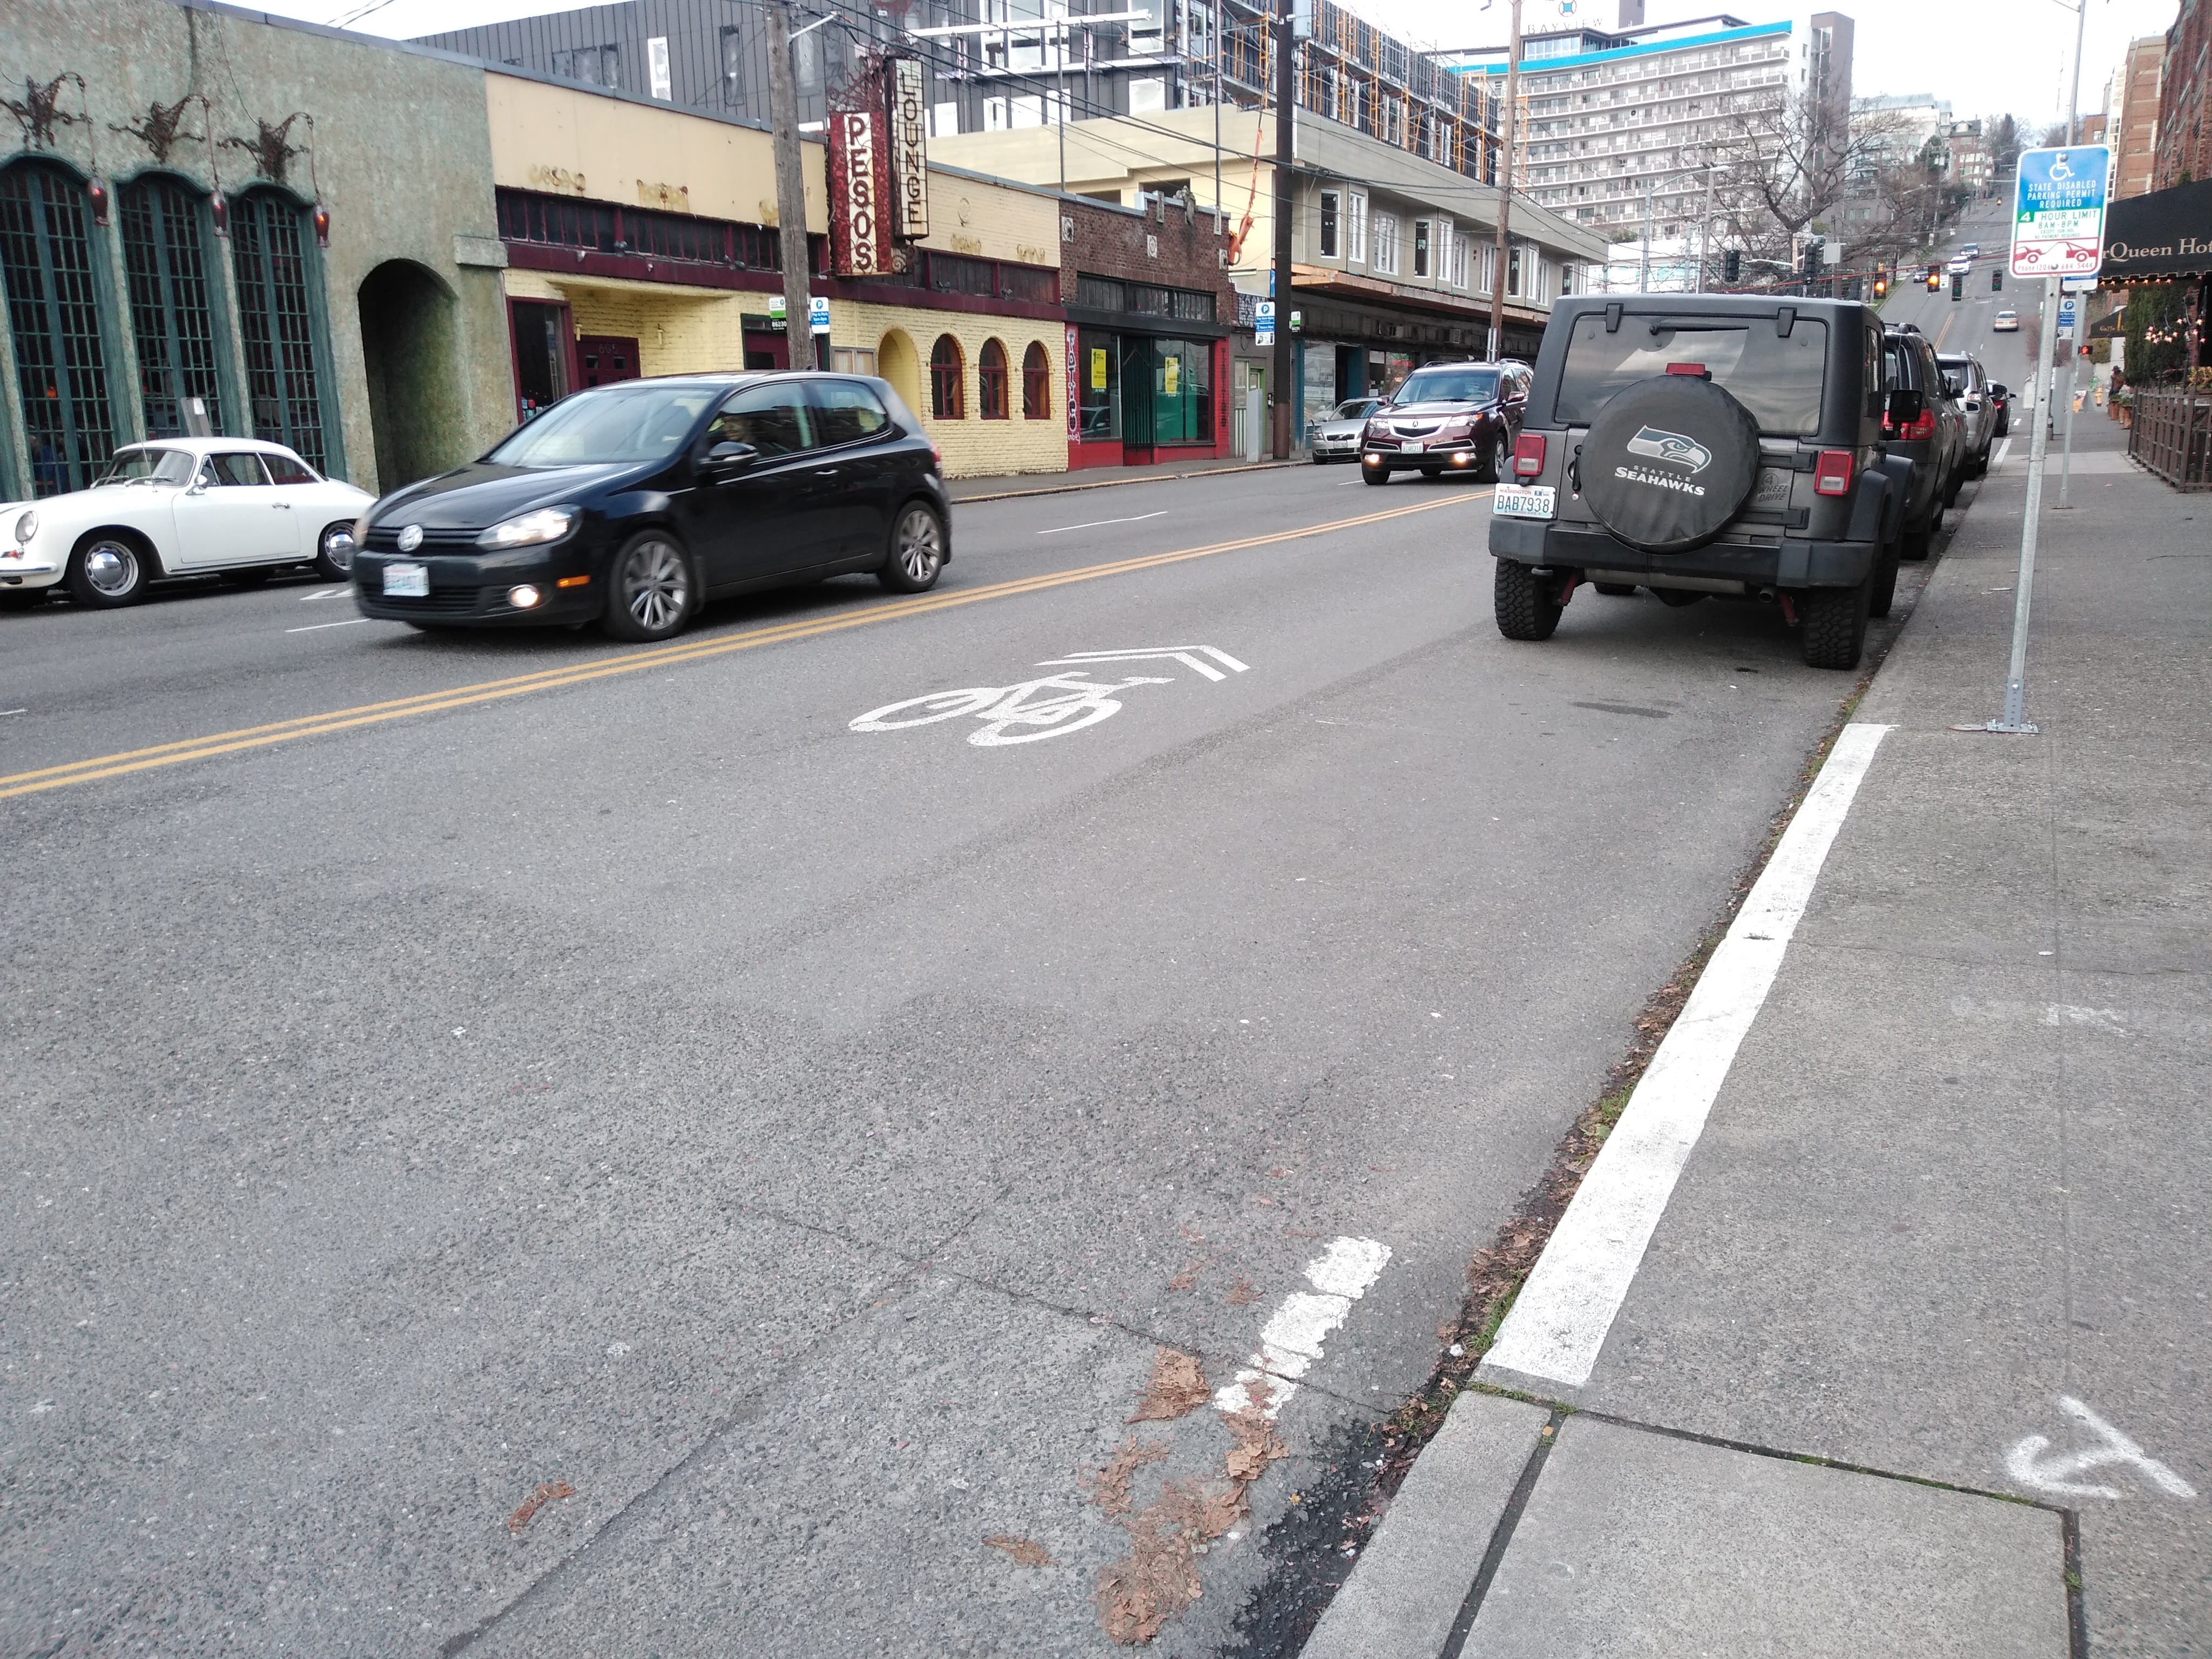 No protected bike lane is planned for a one-block connection of Queen Anne Ave N. (Photo by the author)